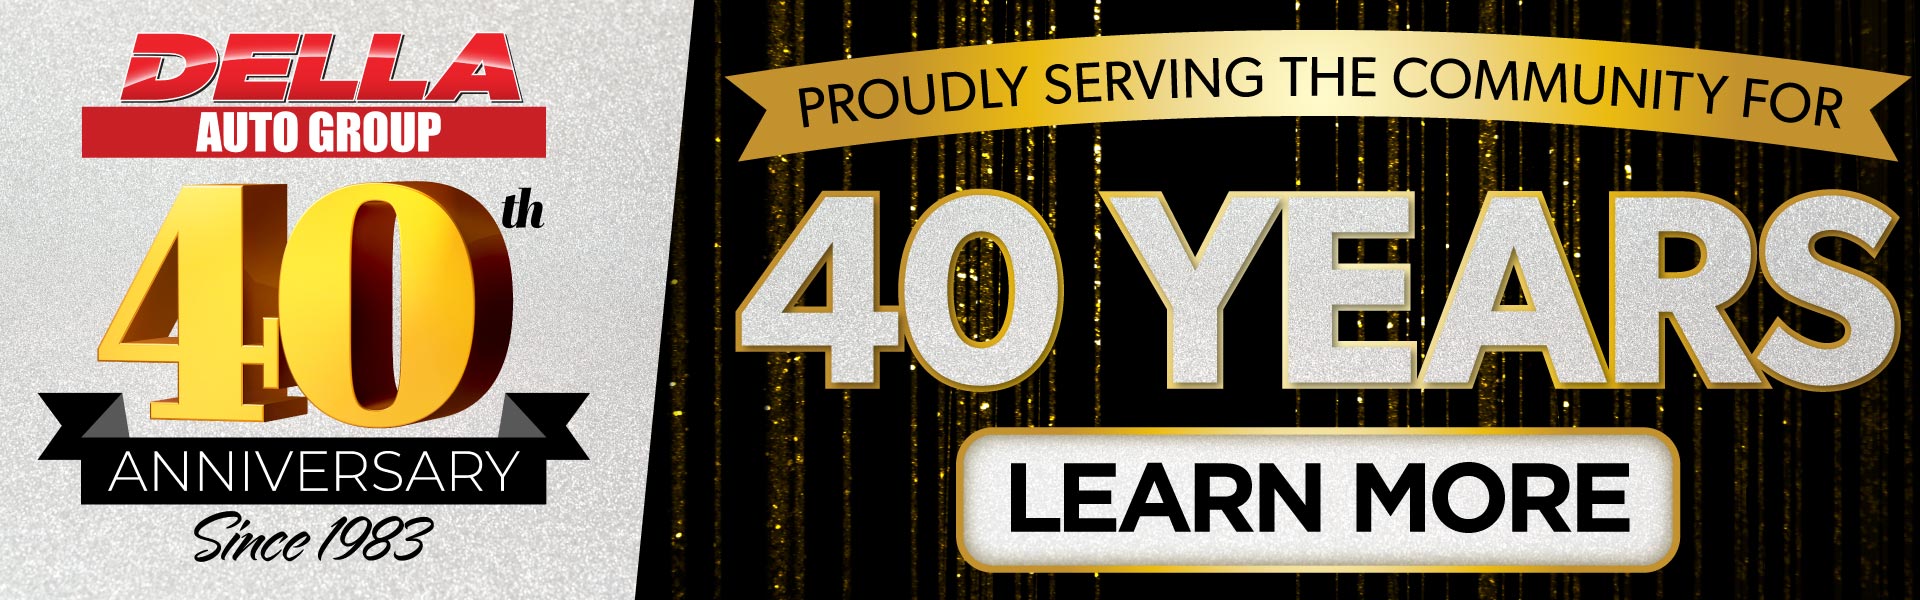 Proudly serving the community for 40 years - Learn More